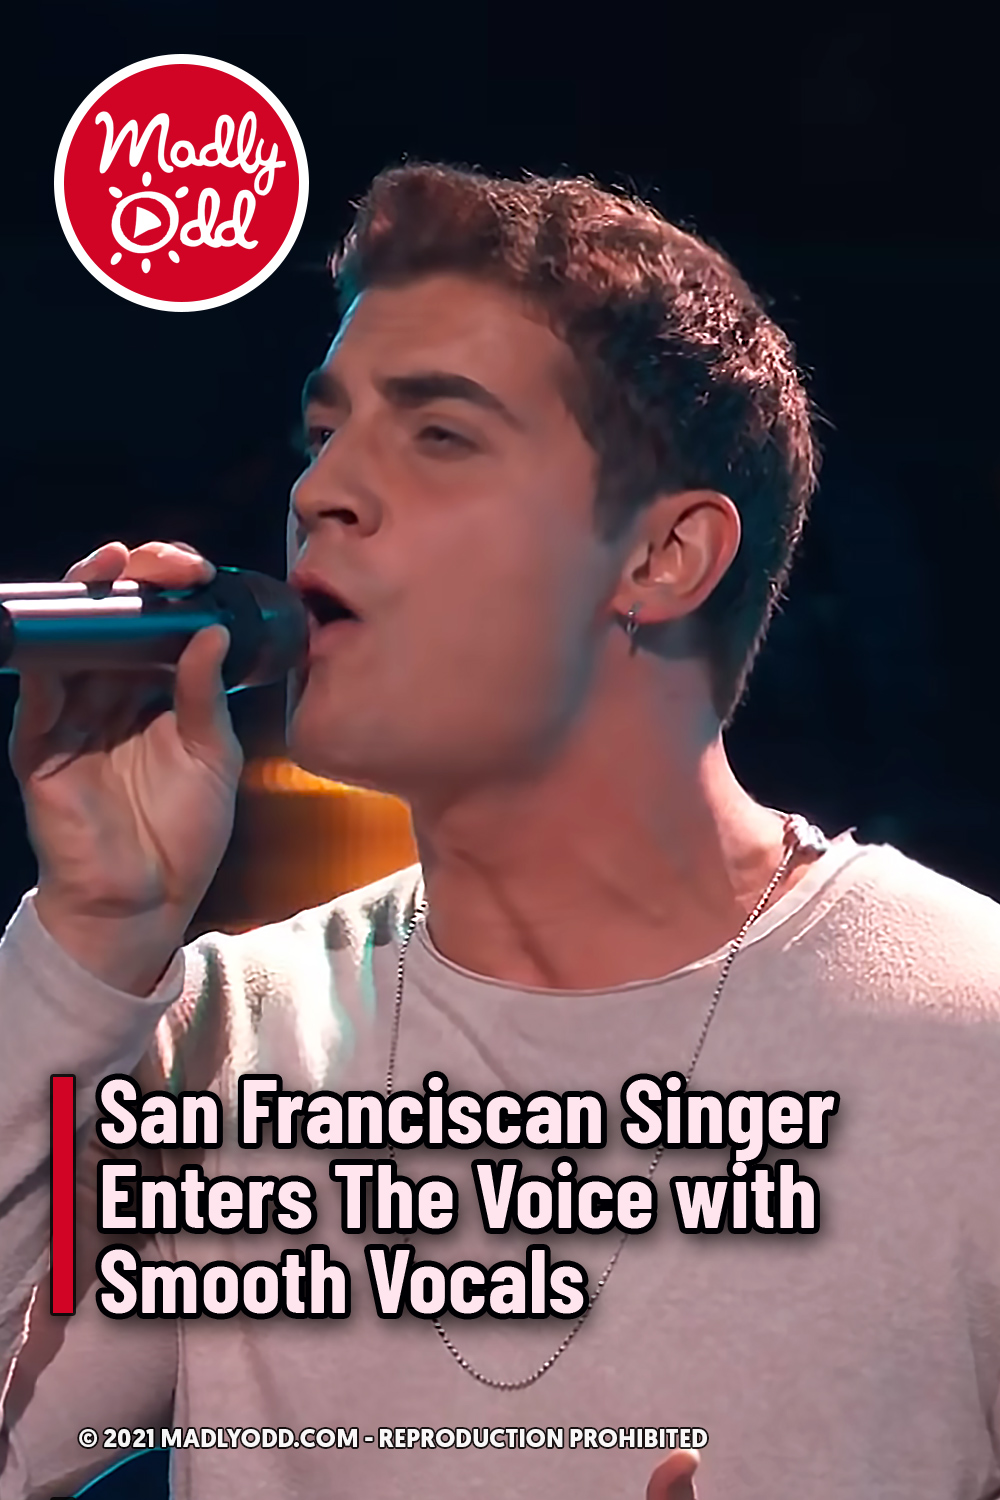 San Franciscan Singer Enters The Voice with Smooth Vocals